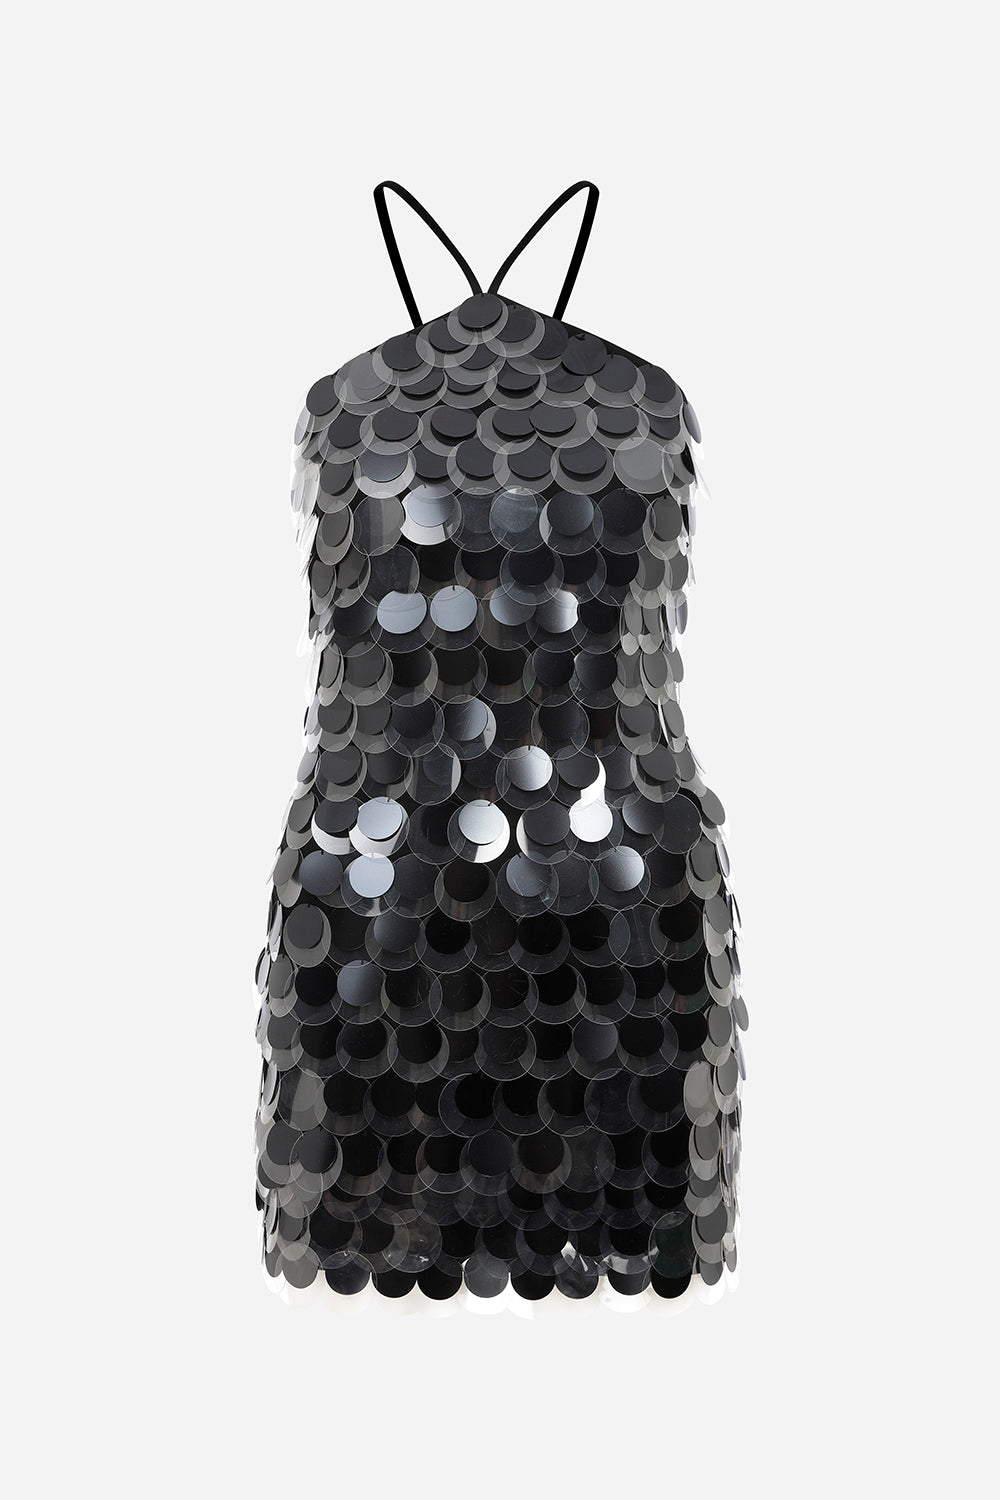 Veronica - Mini Dress With Hand-Stitched Sequin Details